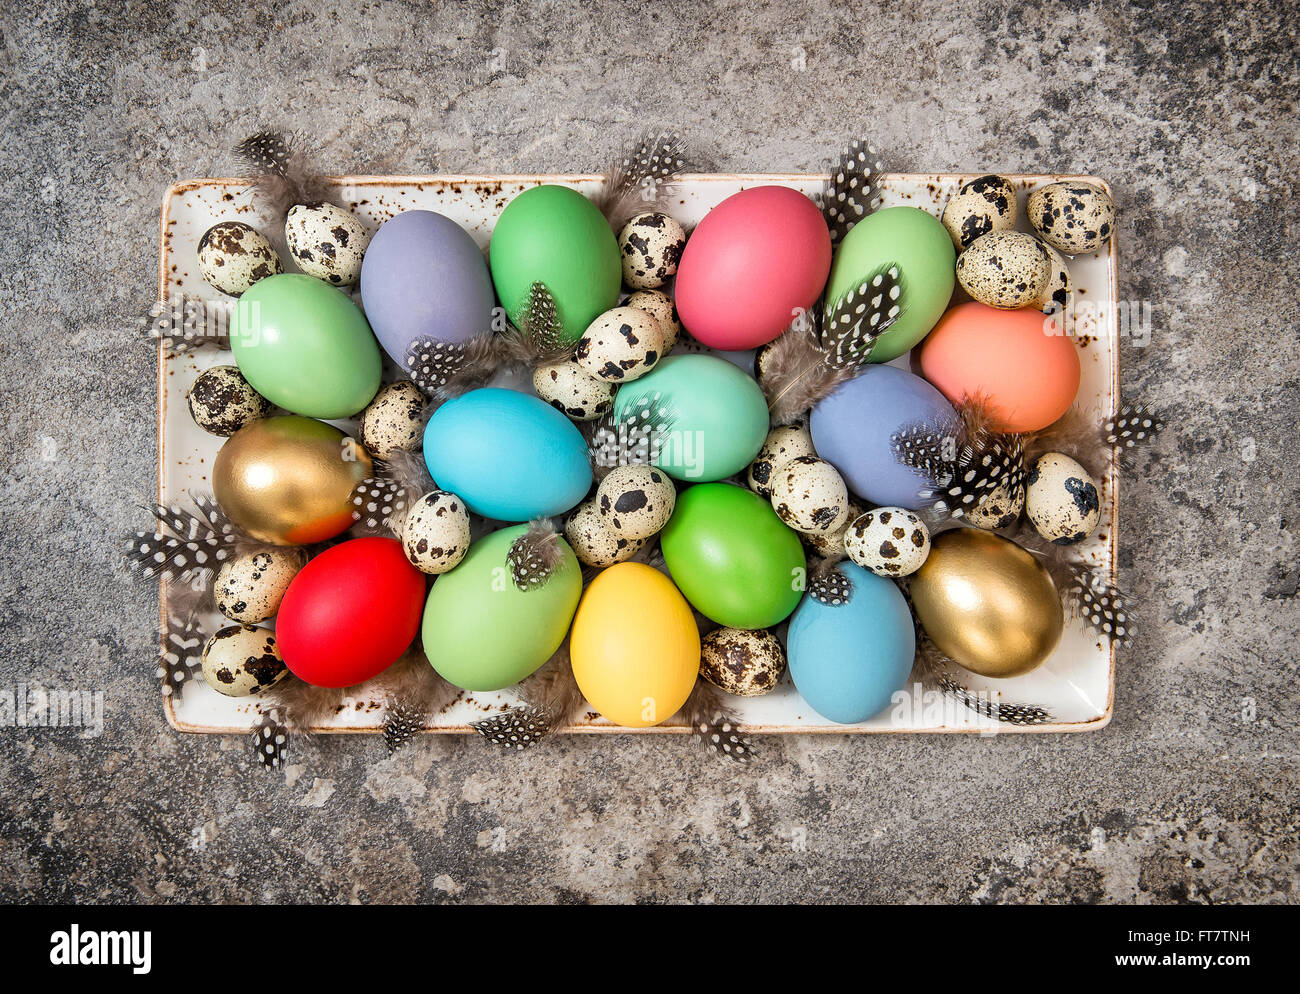 Easter eggs decoration on grey stone background. Vintage style dark toned picture Stock Photo